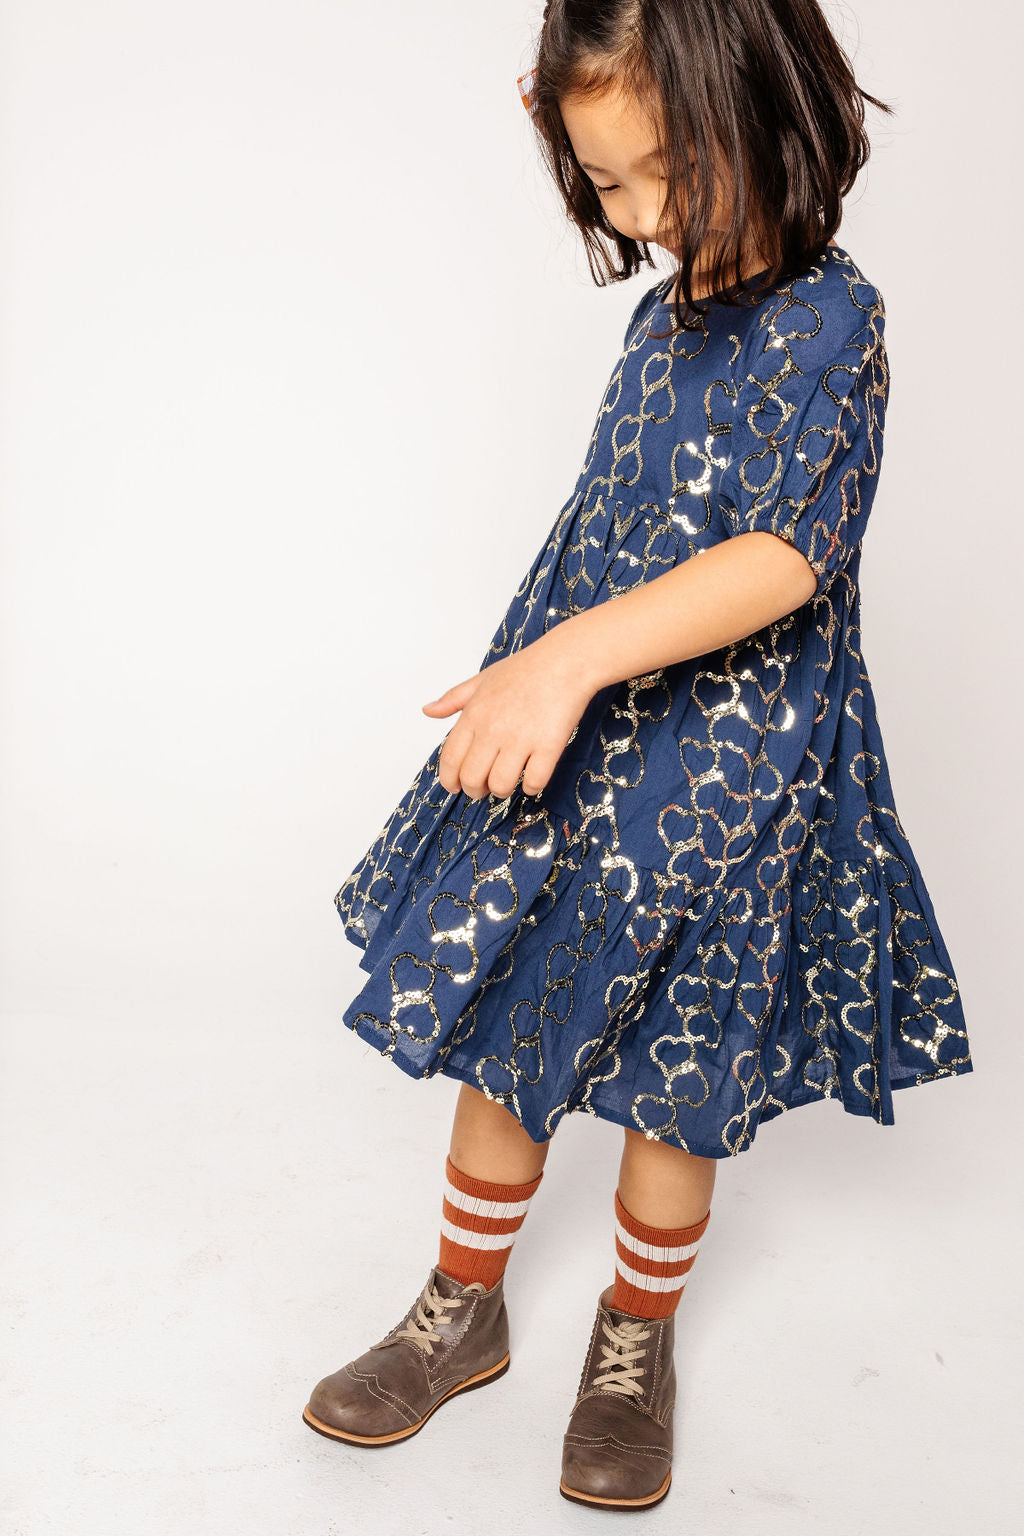 Lucky Jade: Modern Designer Baby Clothes and Girls Dresses